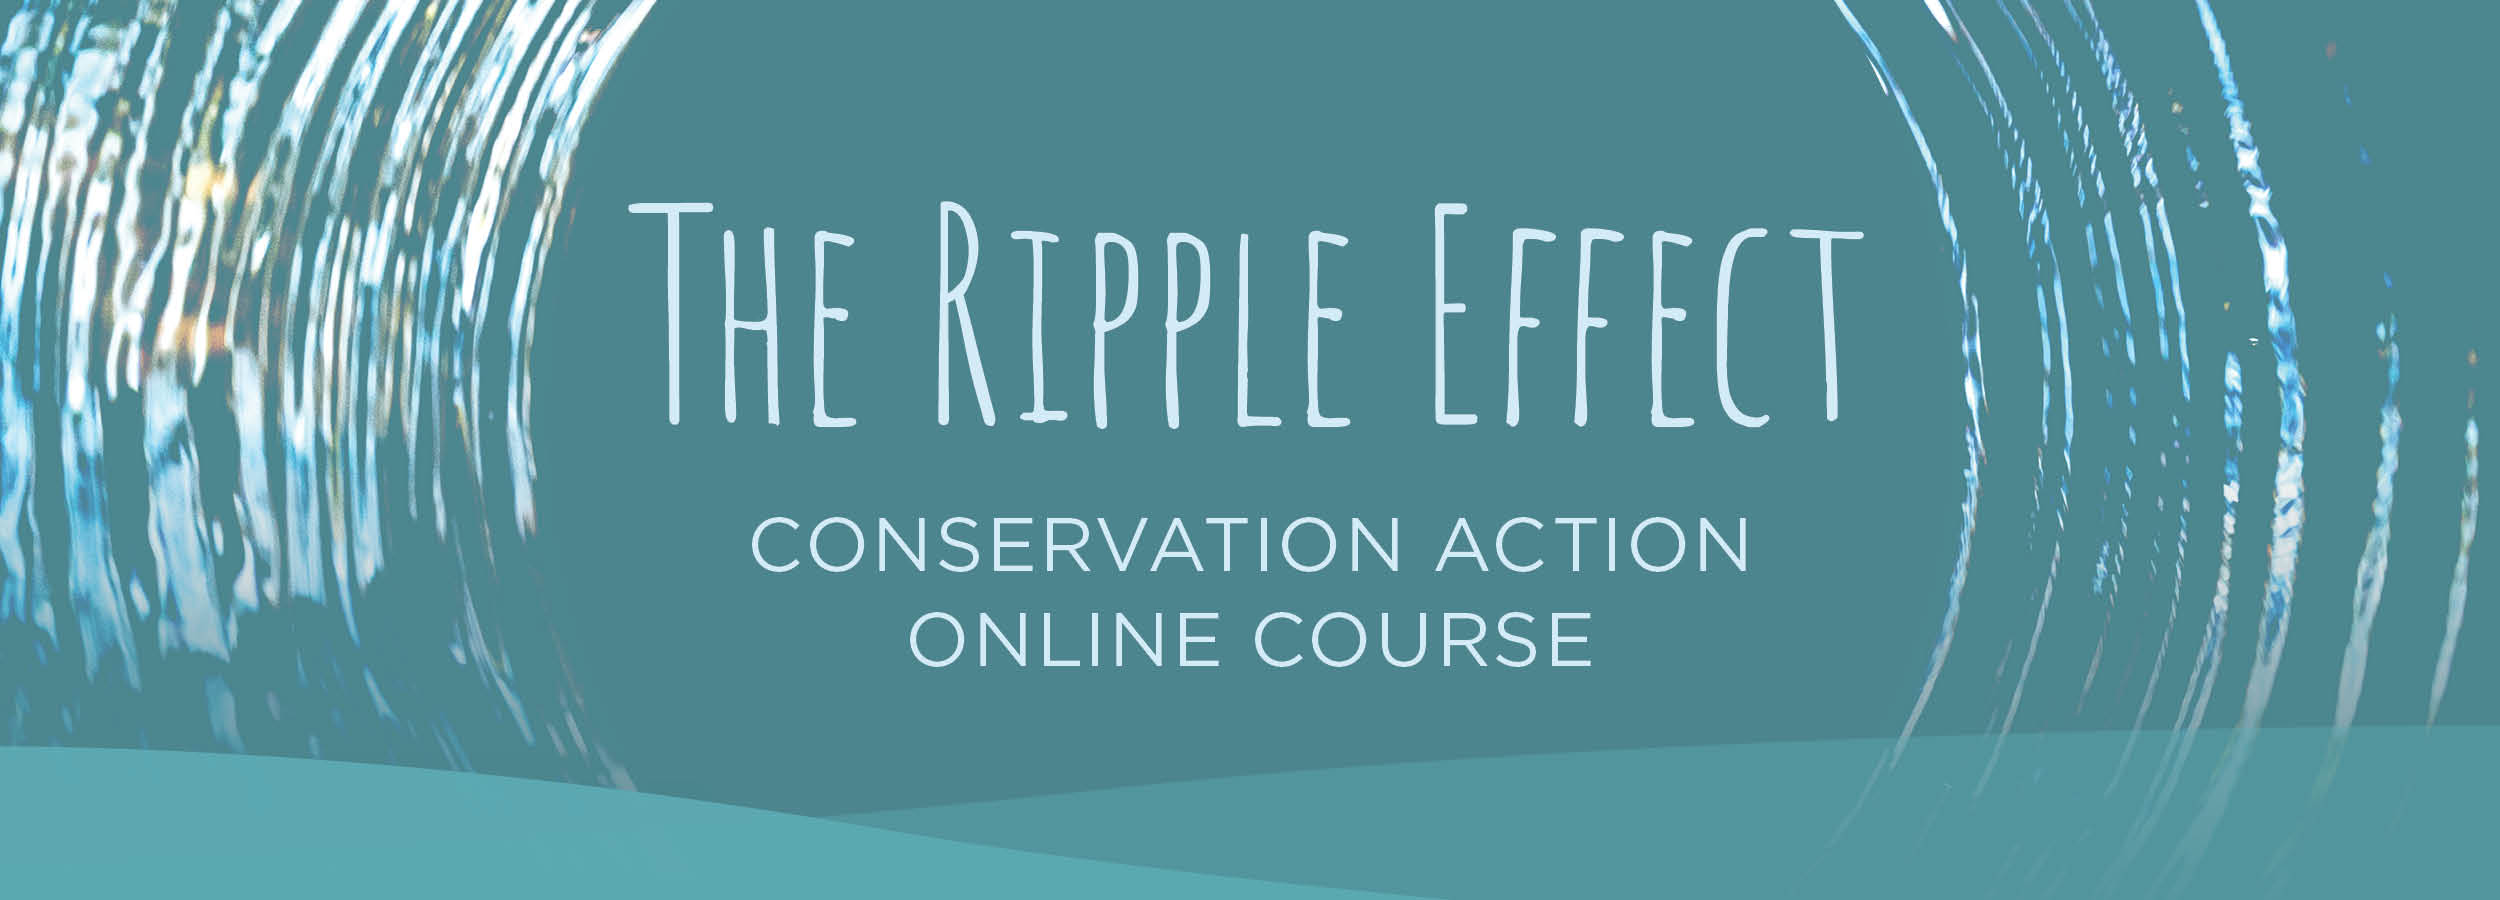 "The Ripple Effect - Conservation Action Online Course" on blue rippling water background.